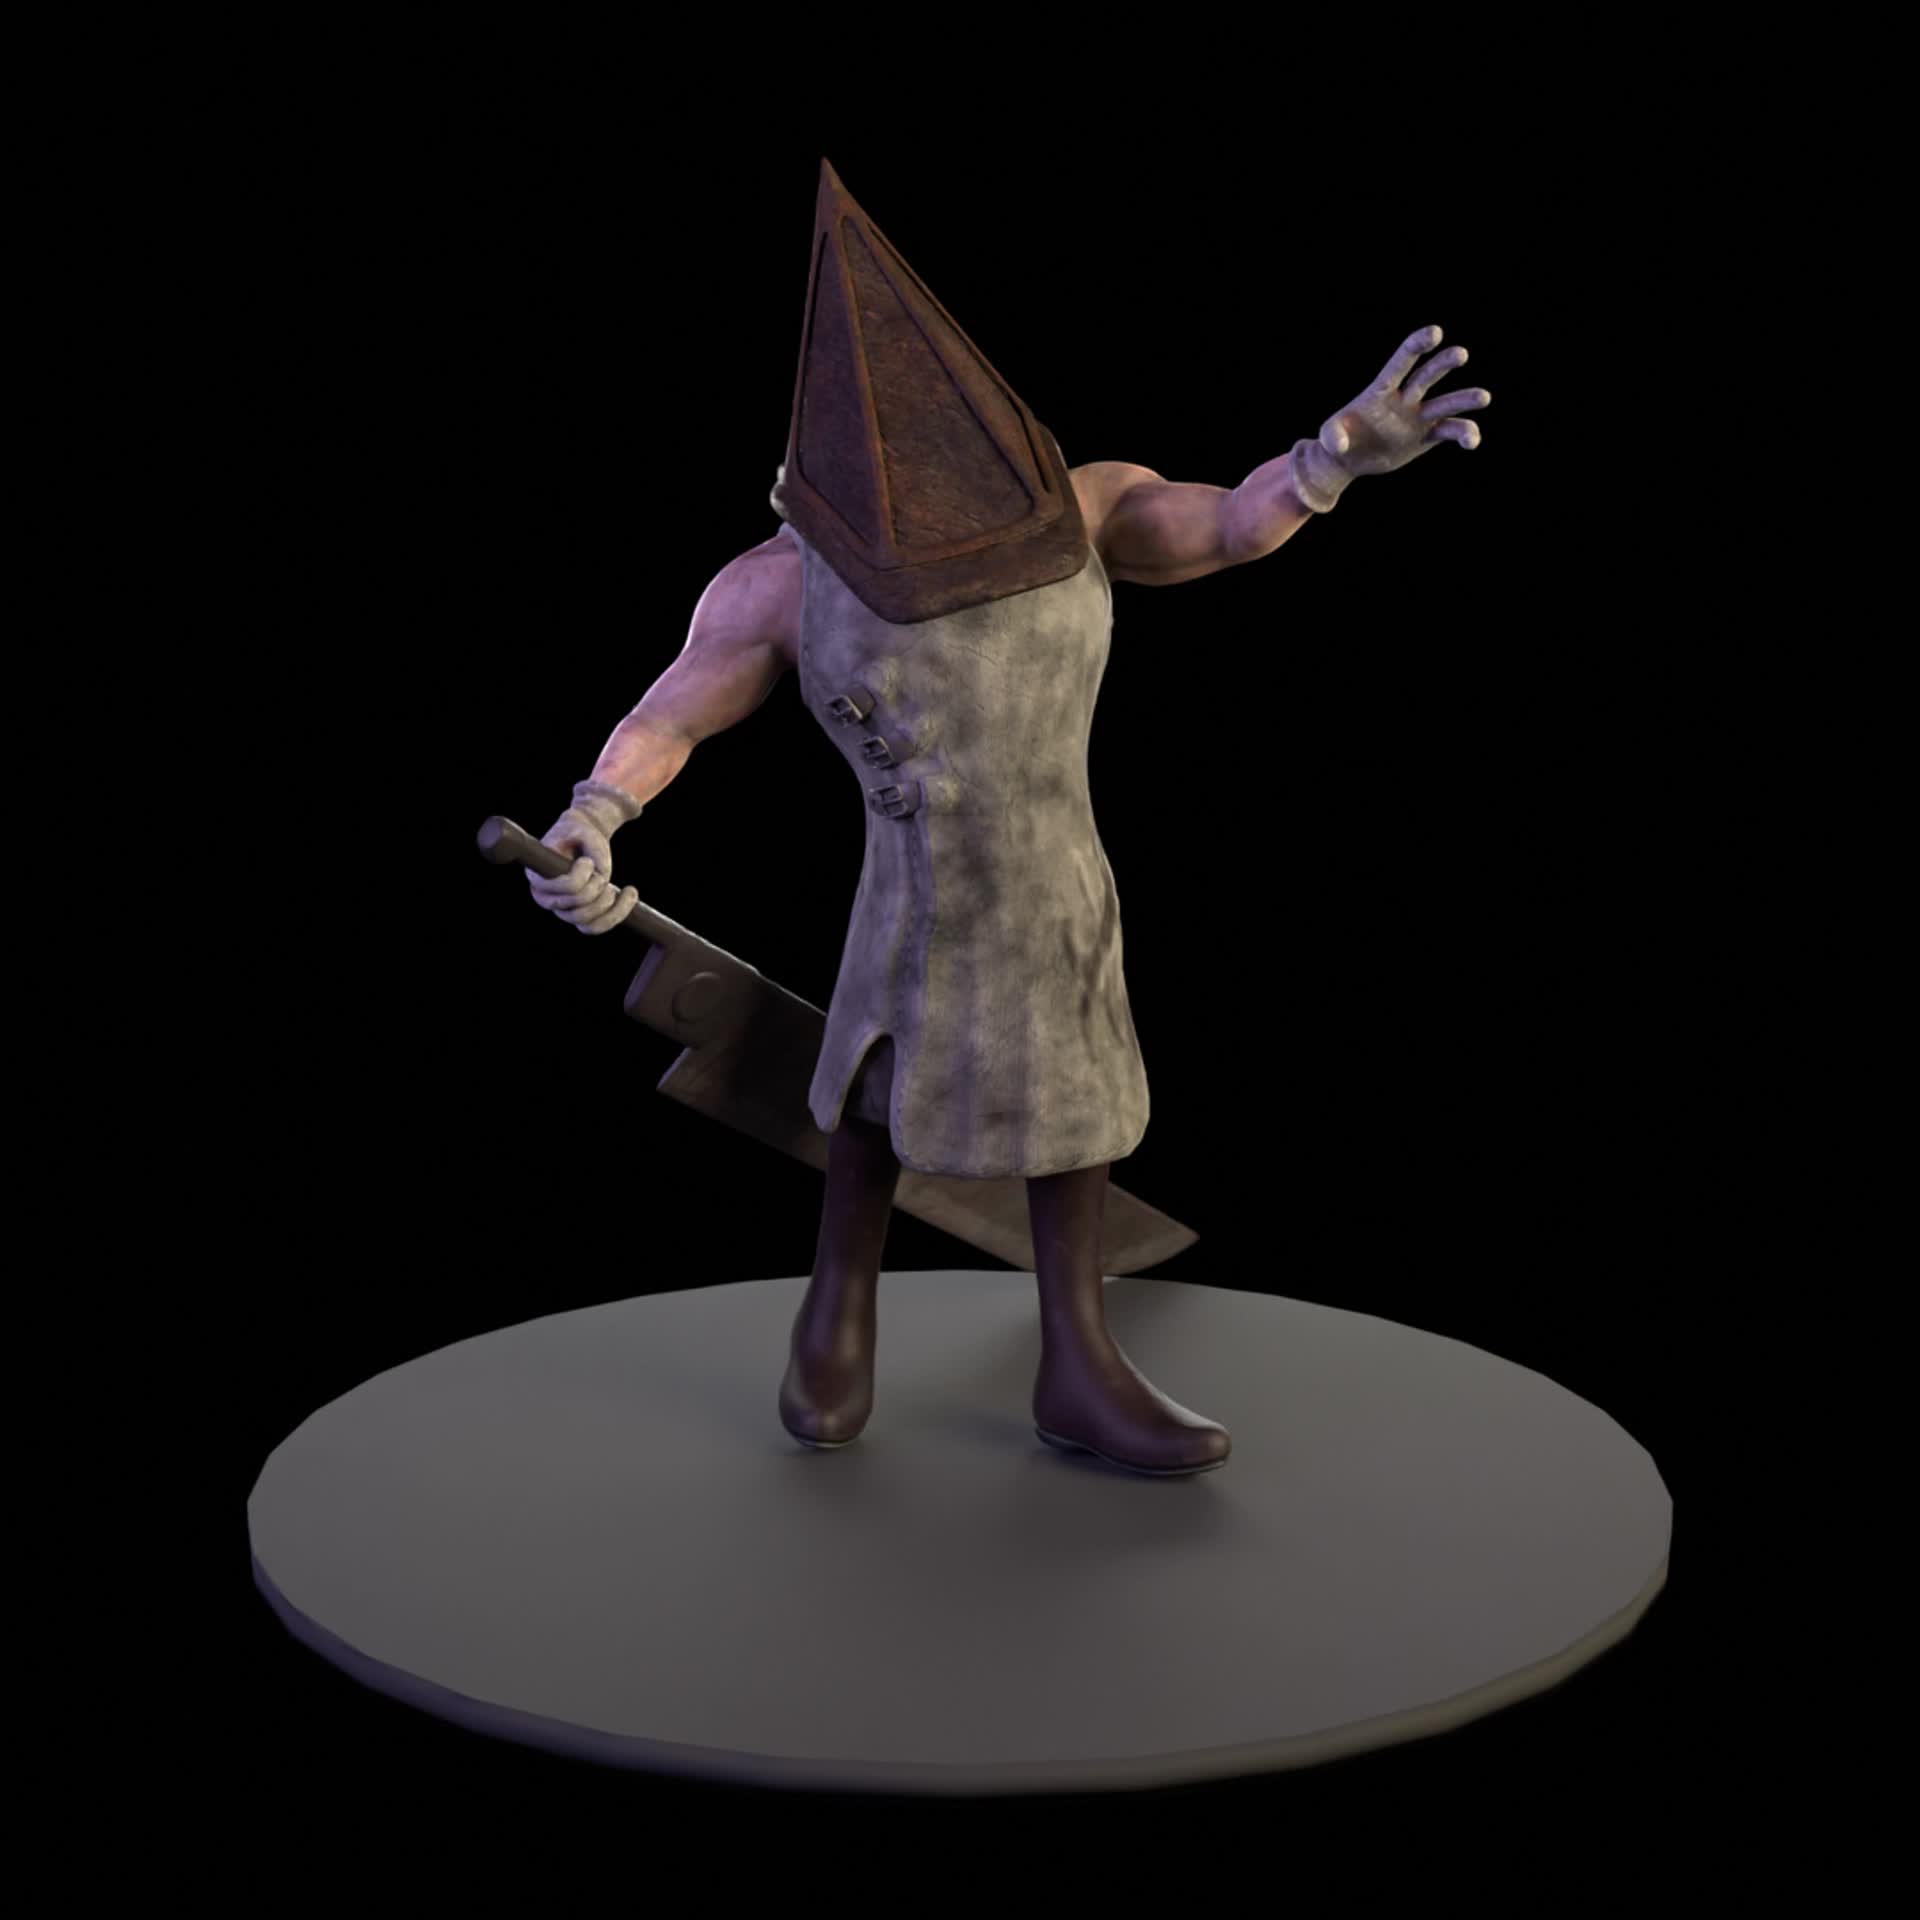 Silent Hill Pyramid Head - Pyramid Head Costume For Sale Png,Silent Hill Png  - free transparent png images 